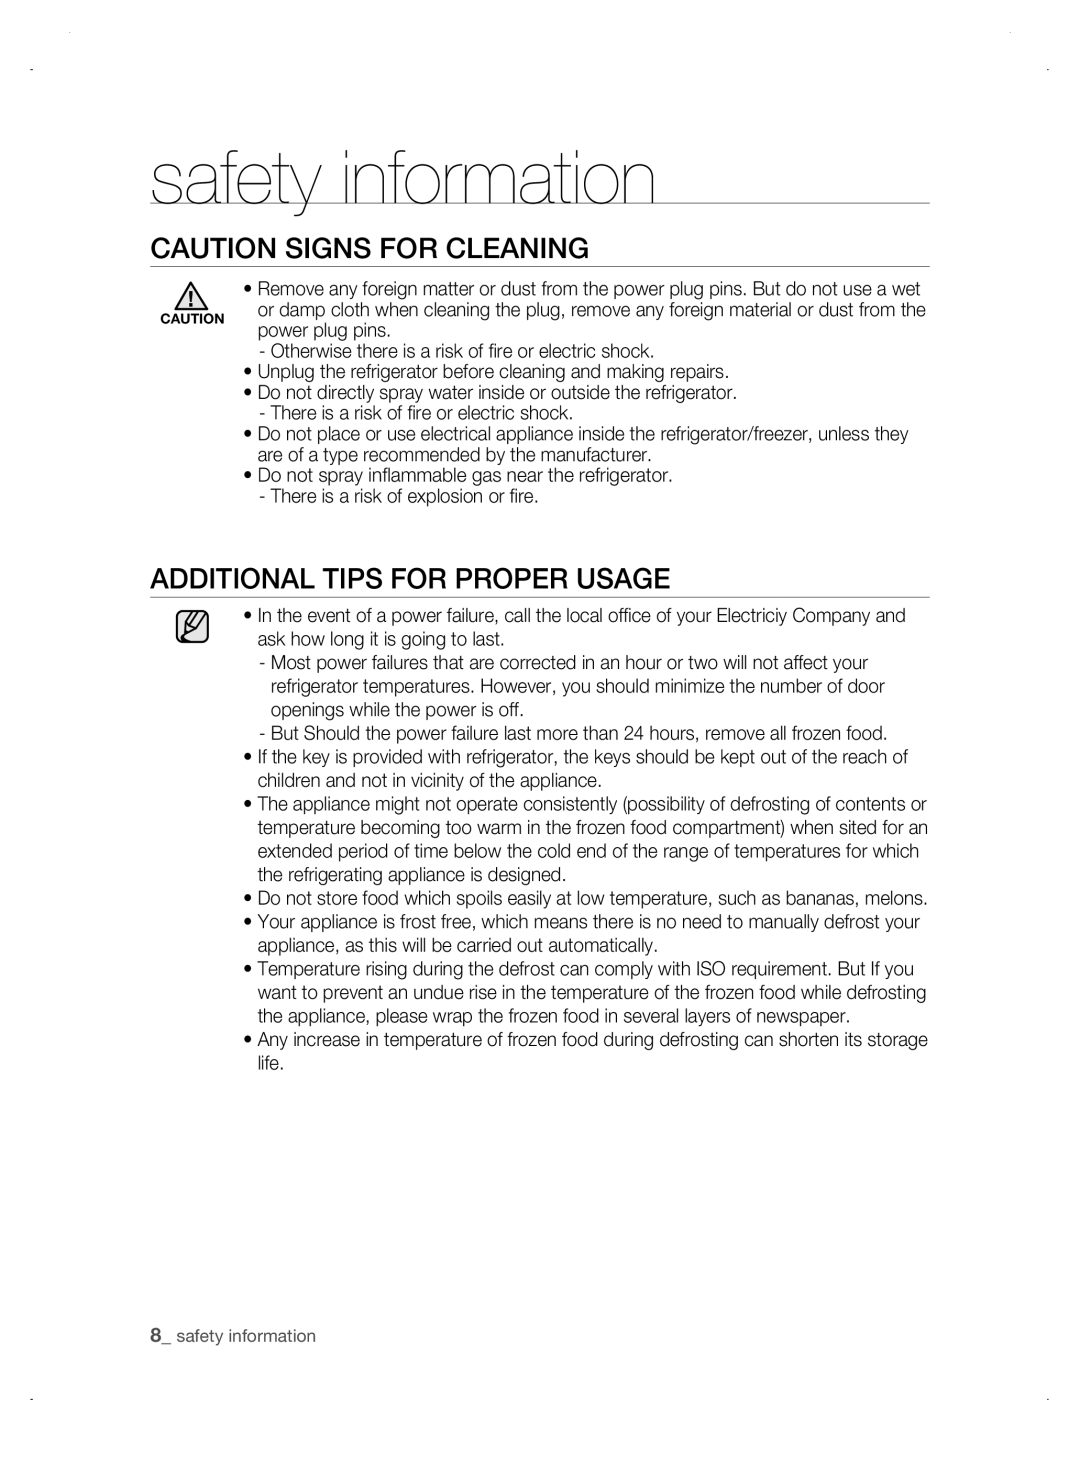 Samsung DA99-01906A user manual CAUTION SIGNS for CLEANING, aDDitionaL tiPs for ProPEr usagE, safety information 